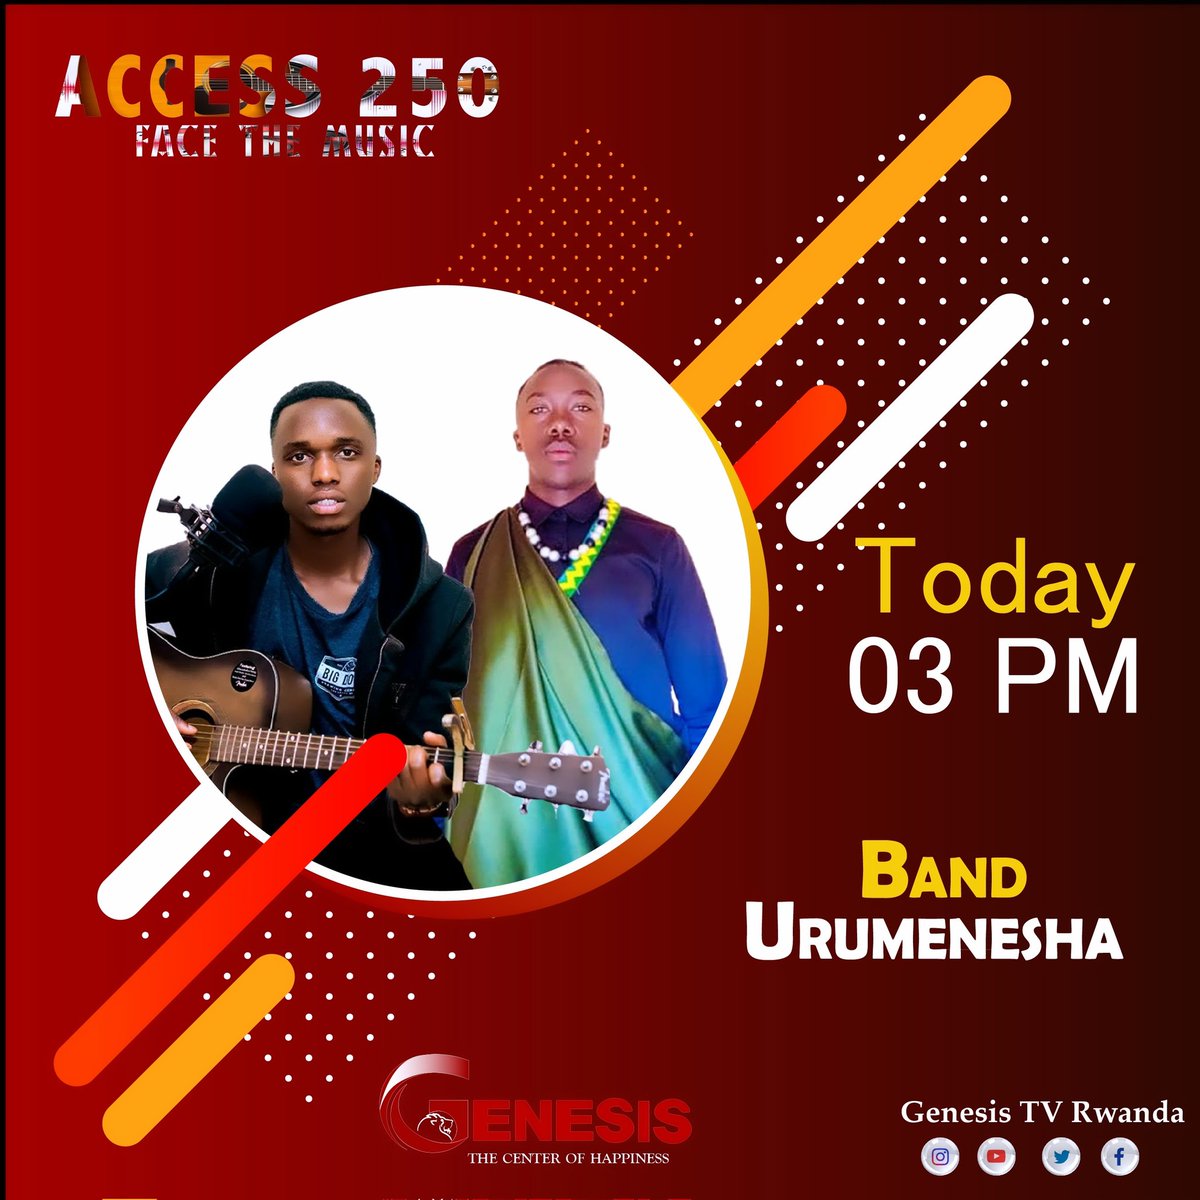 #ACCESS250 Don't miss this afternoon 3PM our very own BAND URUMENESHA will be performing live in the studios of Genesis TV Ch387 canal+

The Center of Happiness 
#Genesistv387 #Genesistvrwanda #livemusic #liveperformance #RwOT #RwOX